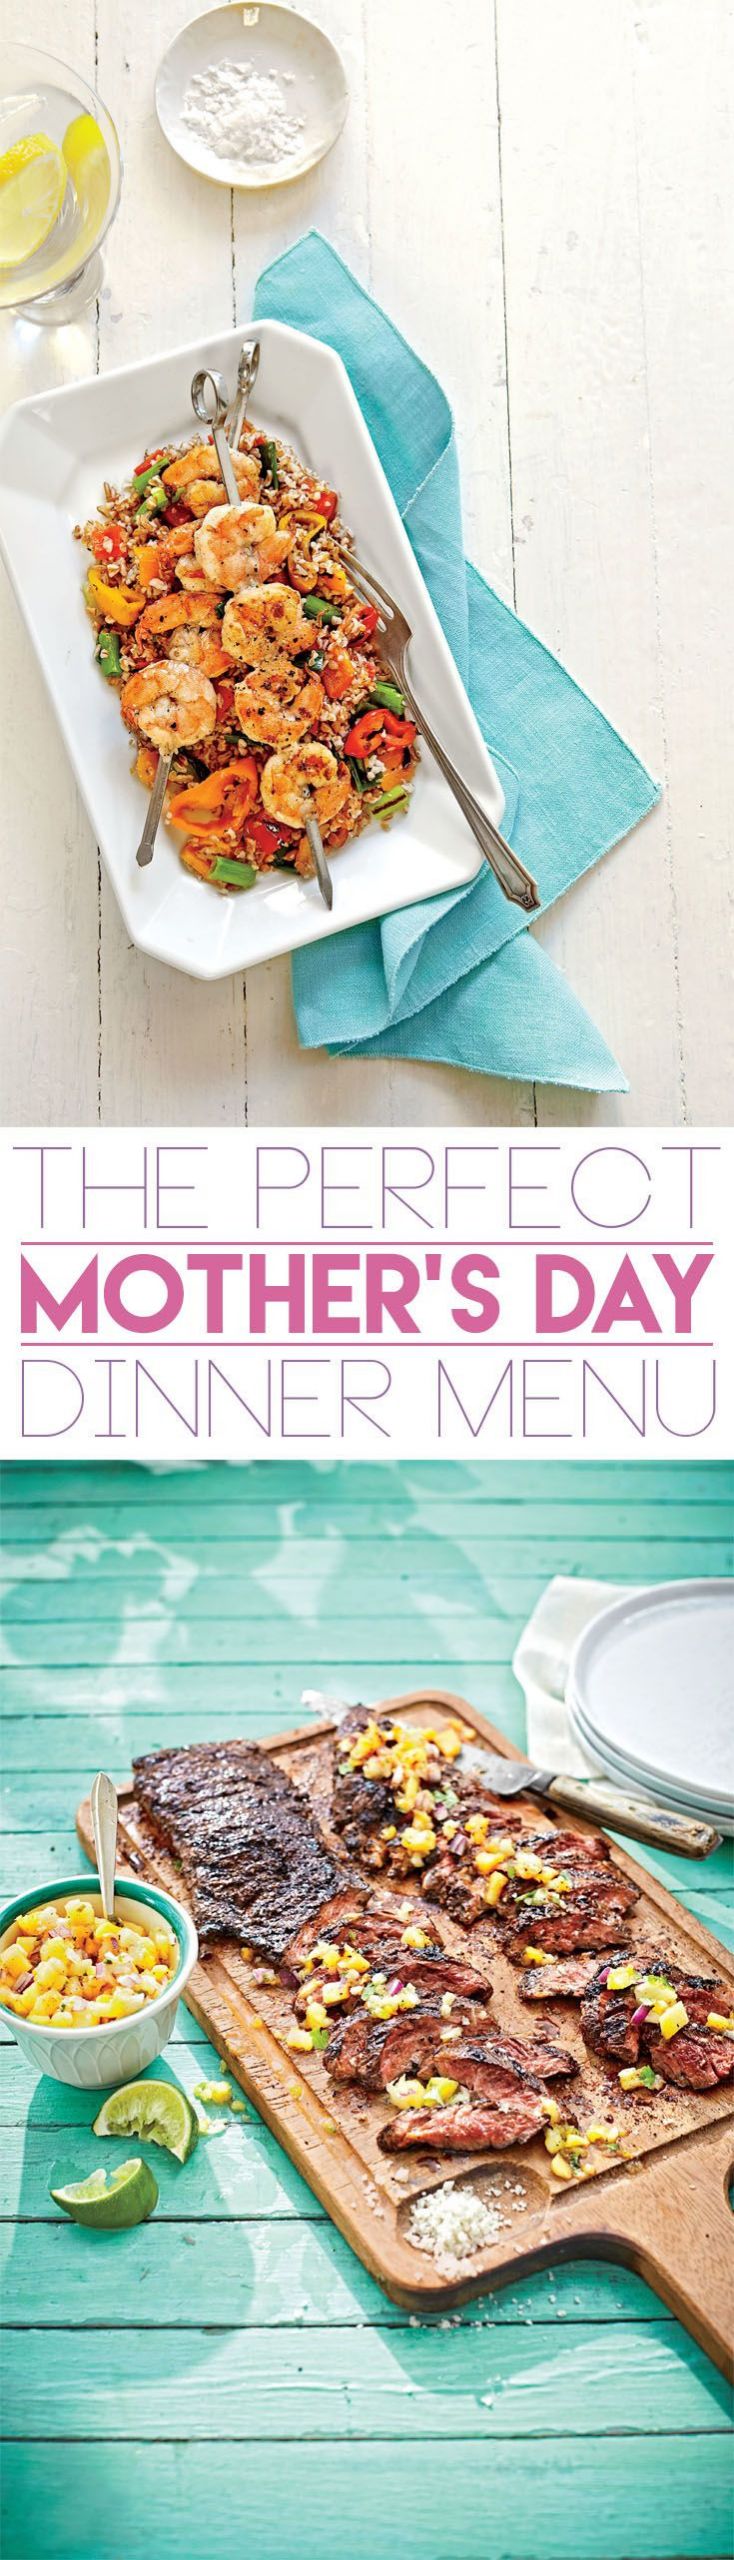 Good Mothers Day Dinners
 Surprise Mom with a Great Mother’s Day Dinner